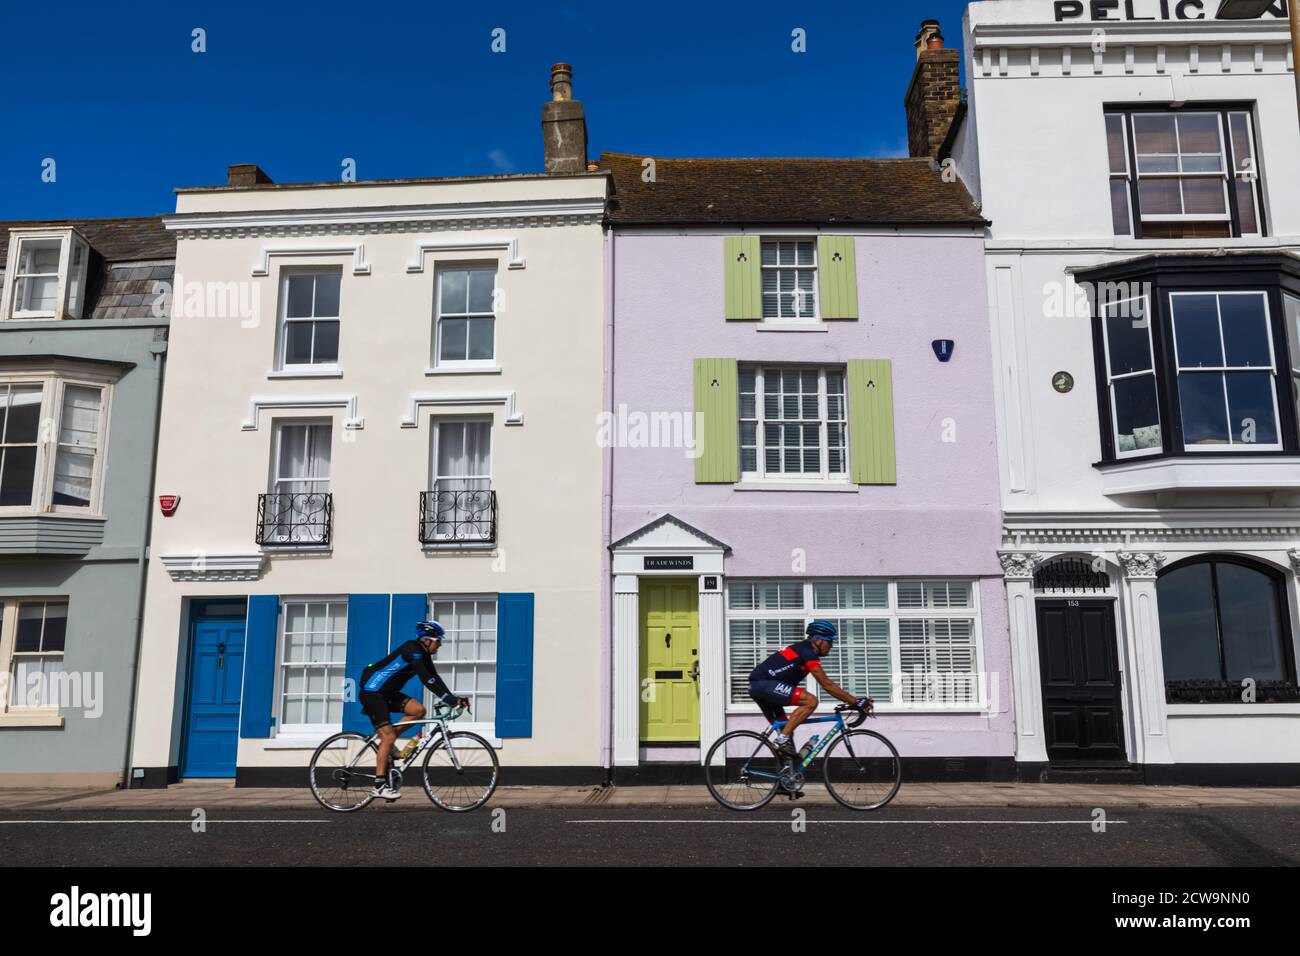 Inghilterra, Kent, Deal, Residential Street Scene con case colorate Foto Stock